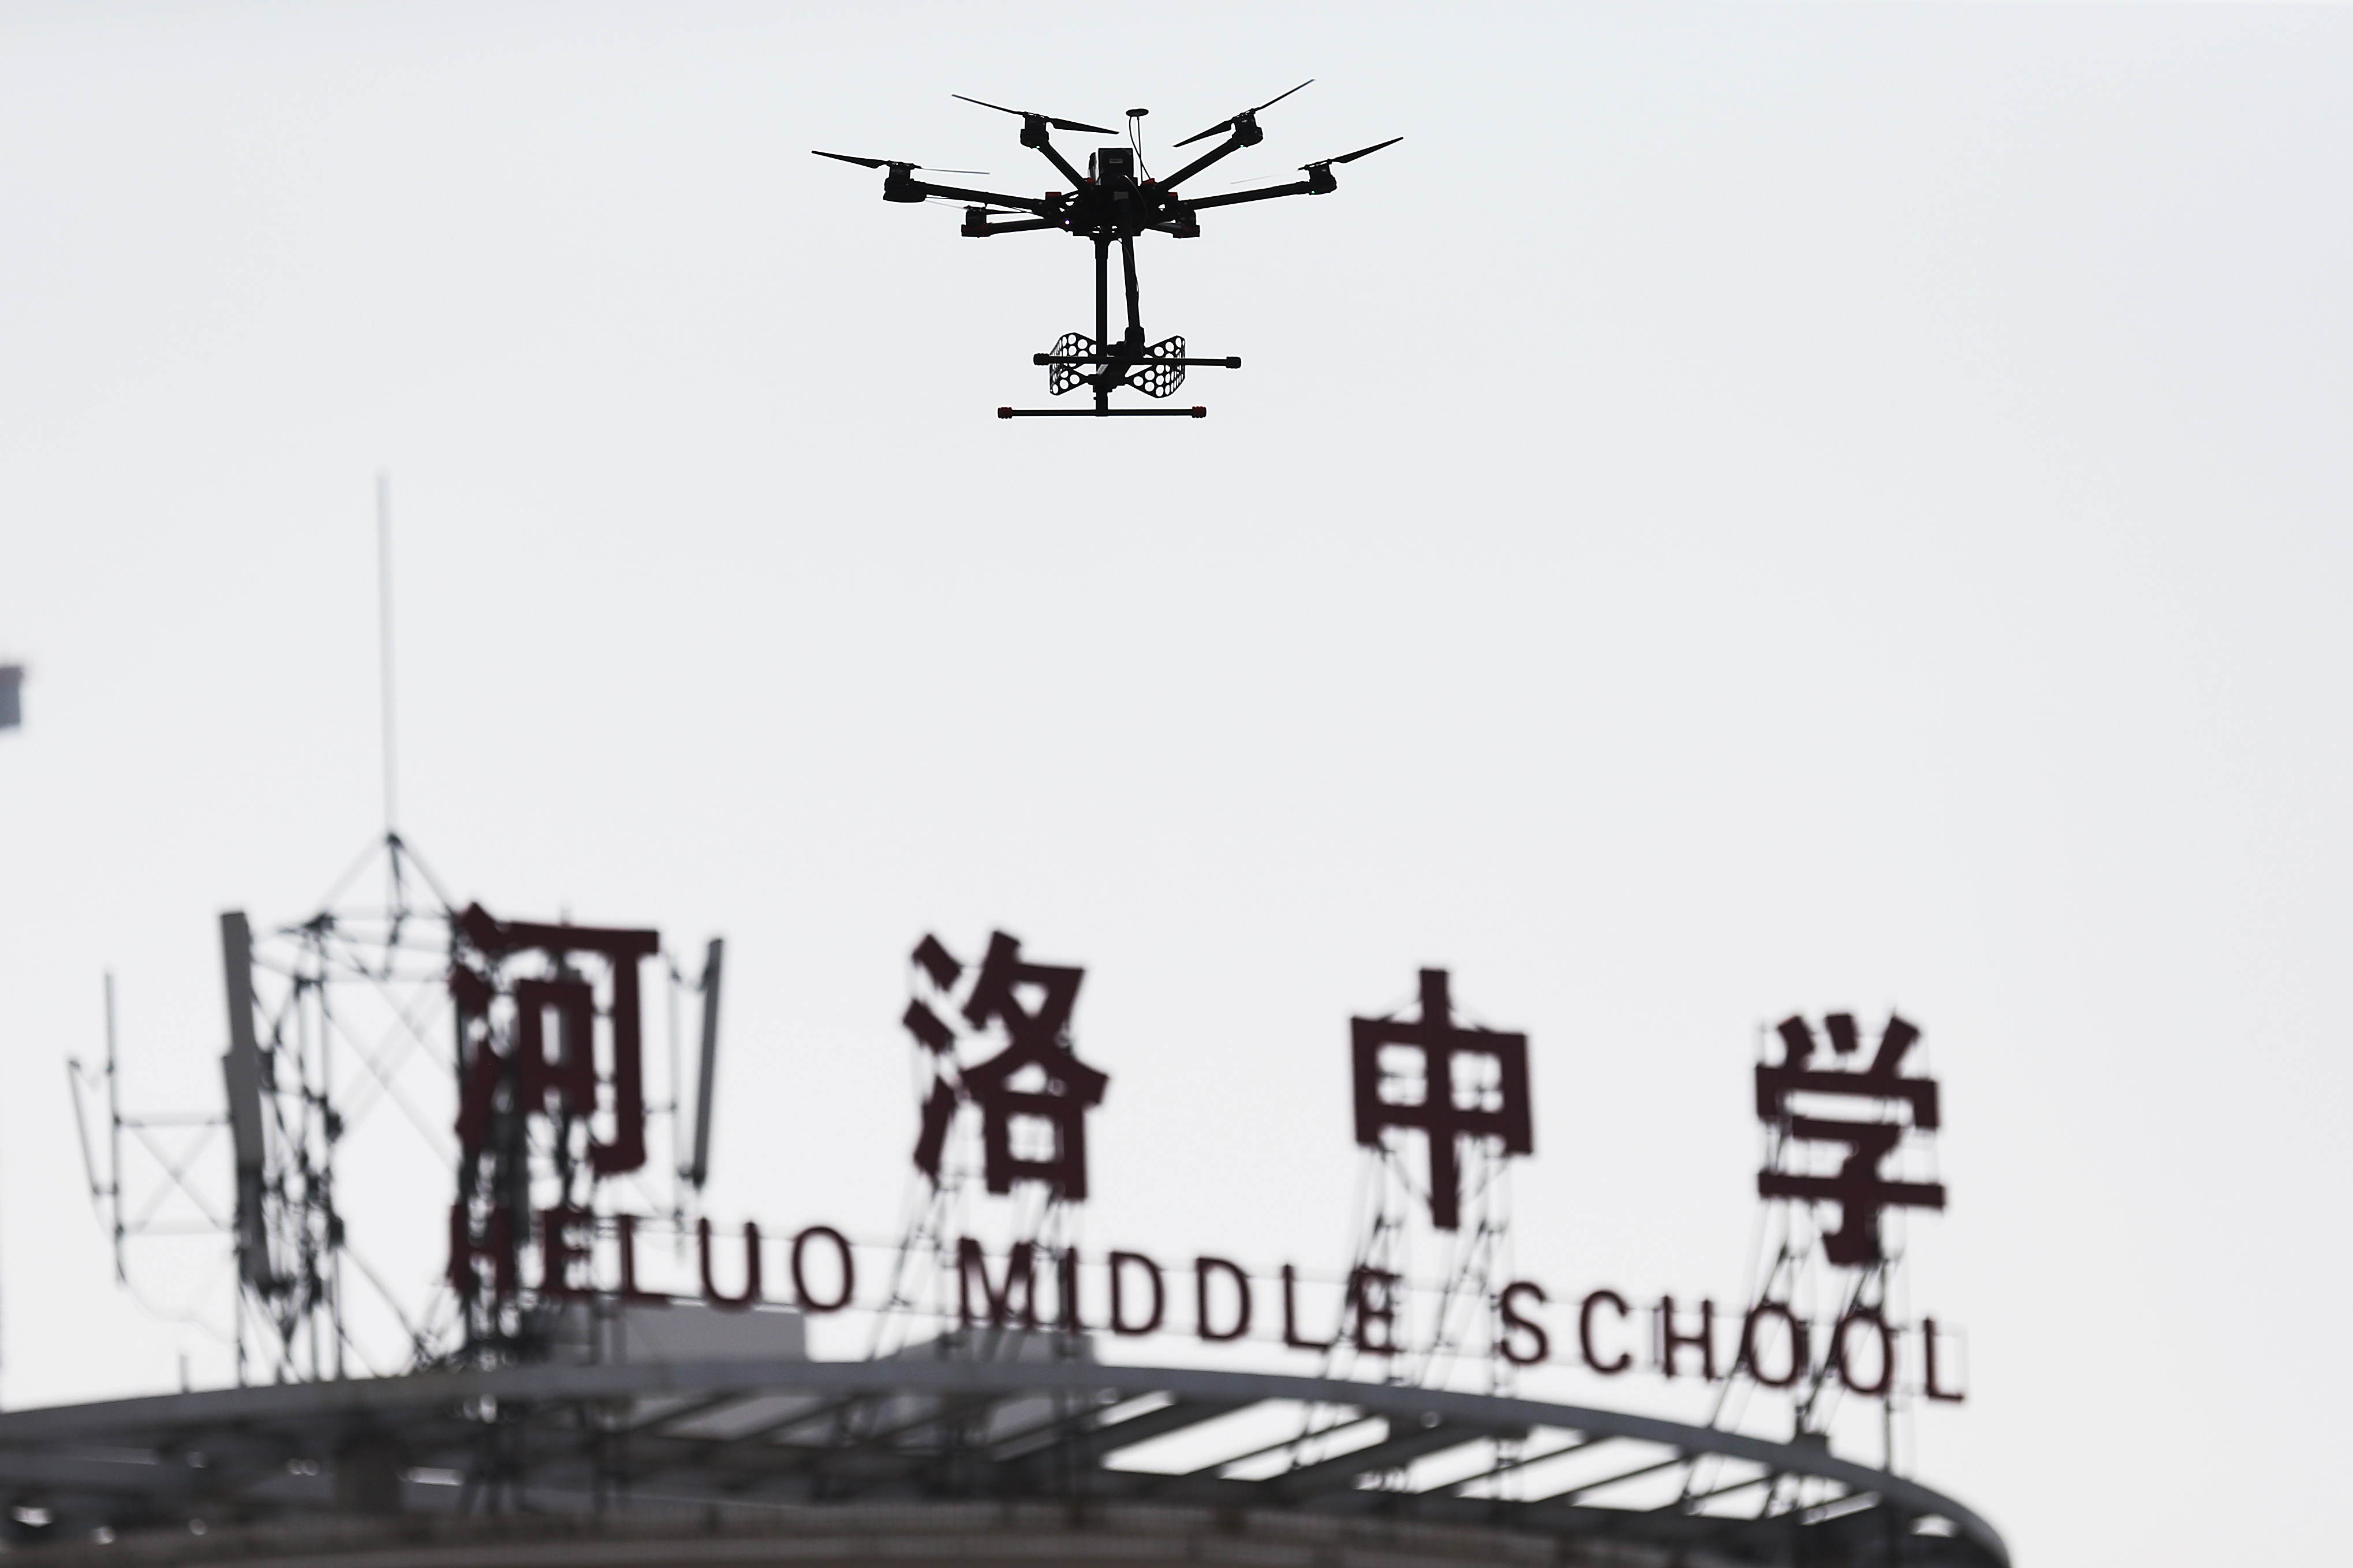 China entrance exam uses drone to prevent student from cheating